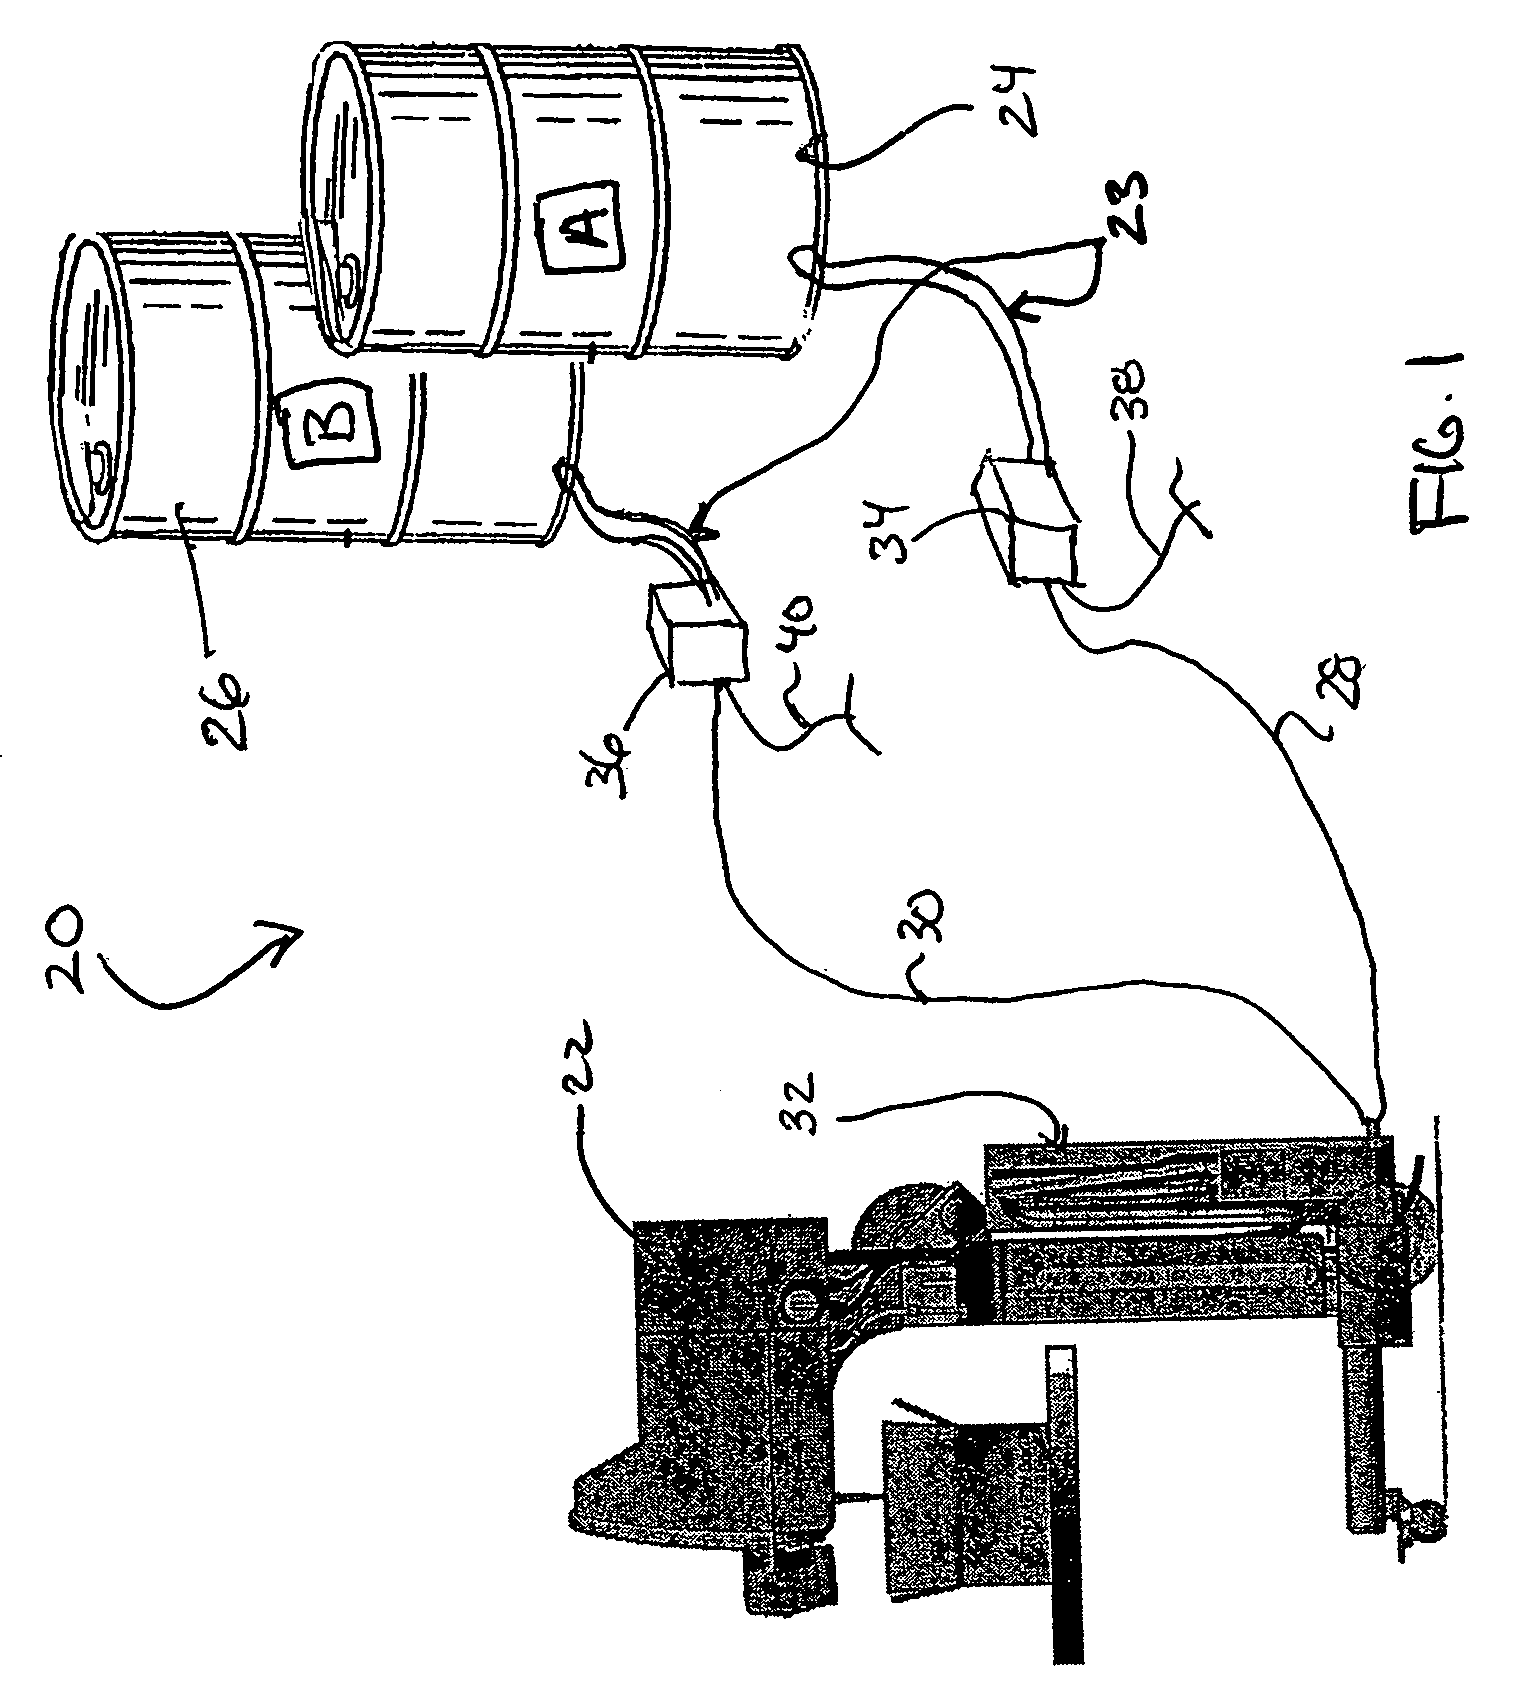 Mixing module drive mechanism and dispensing system with same